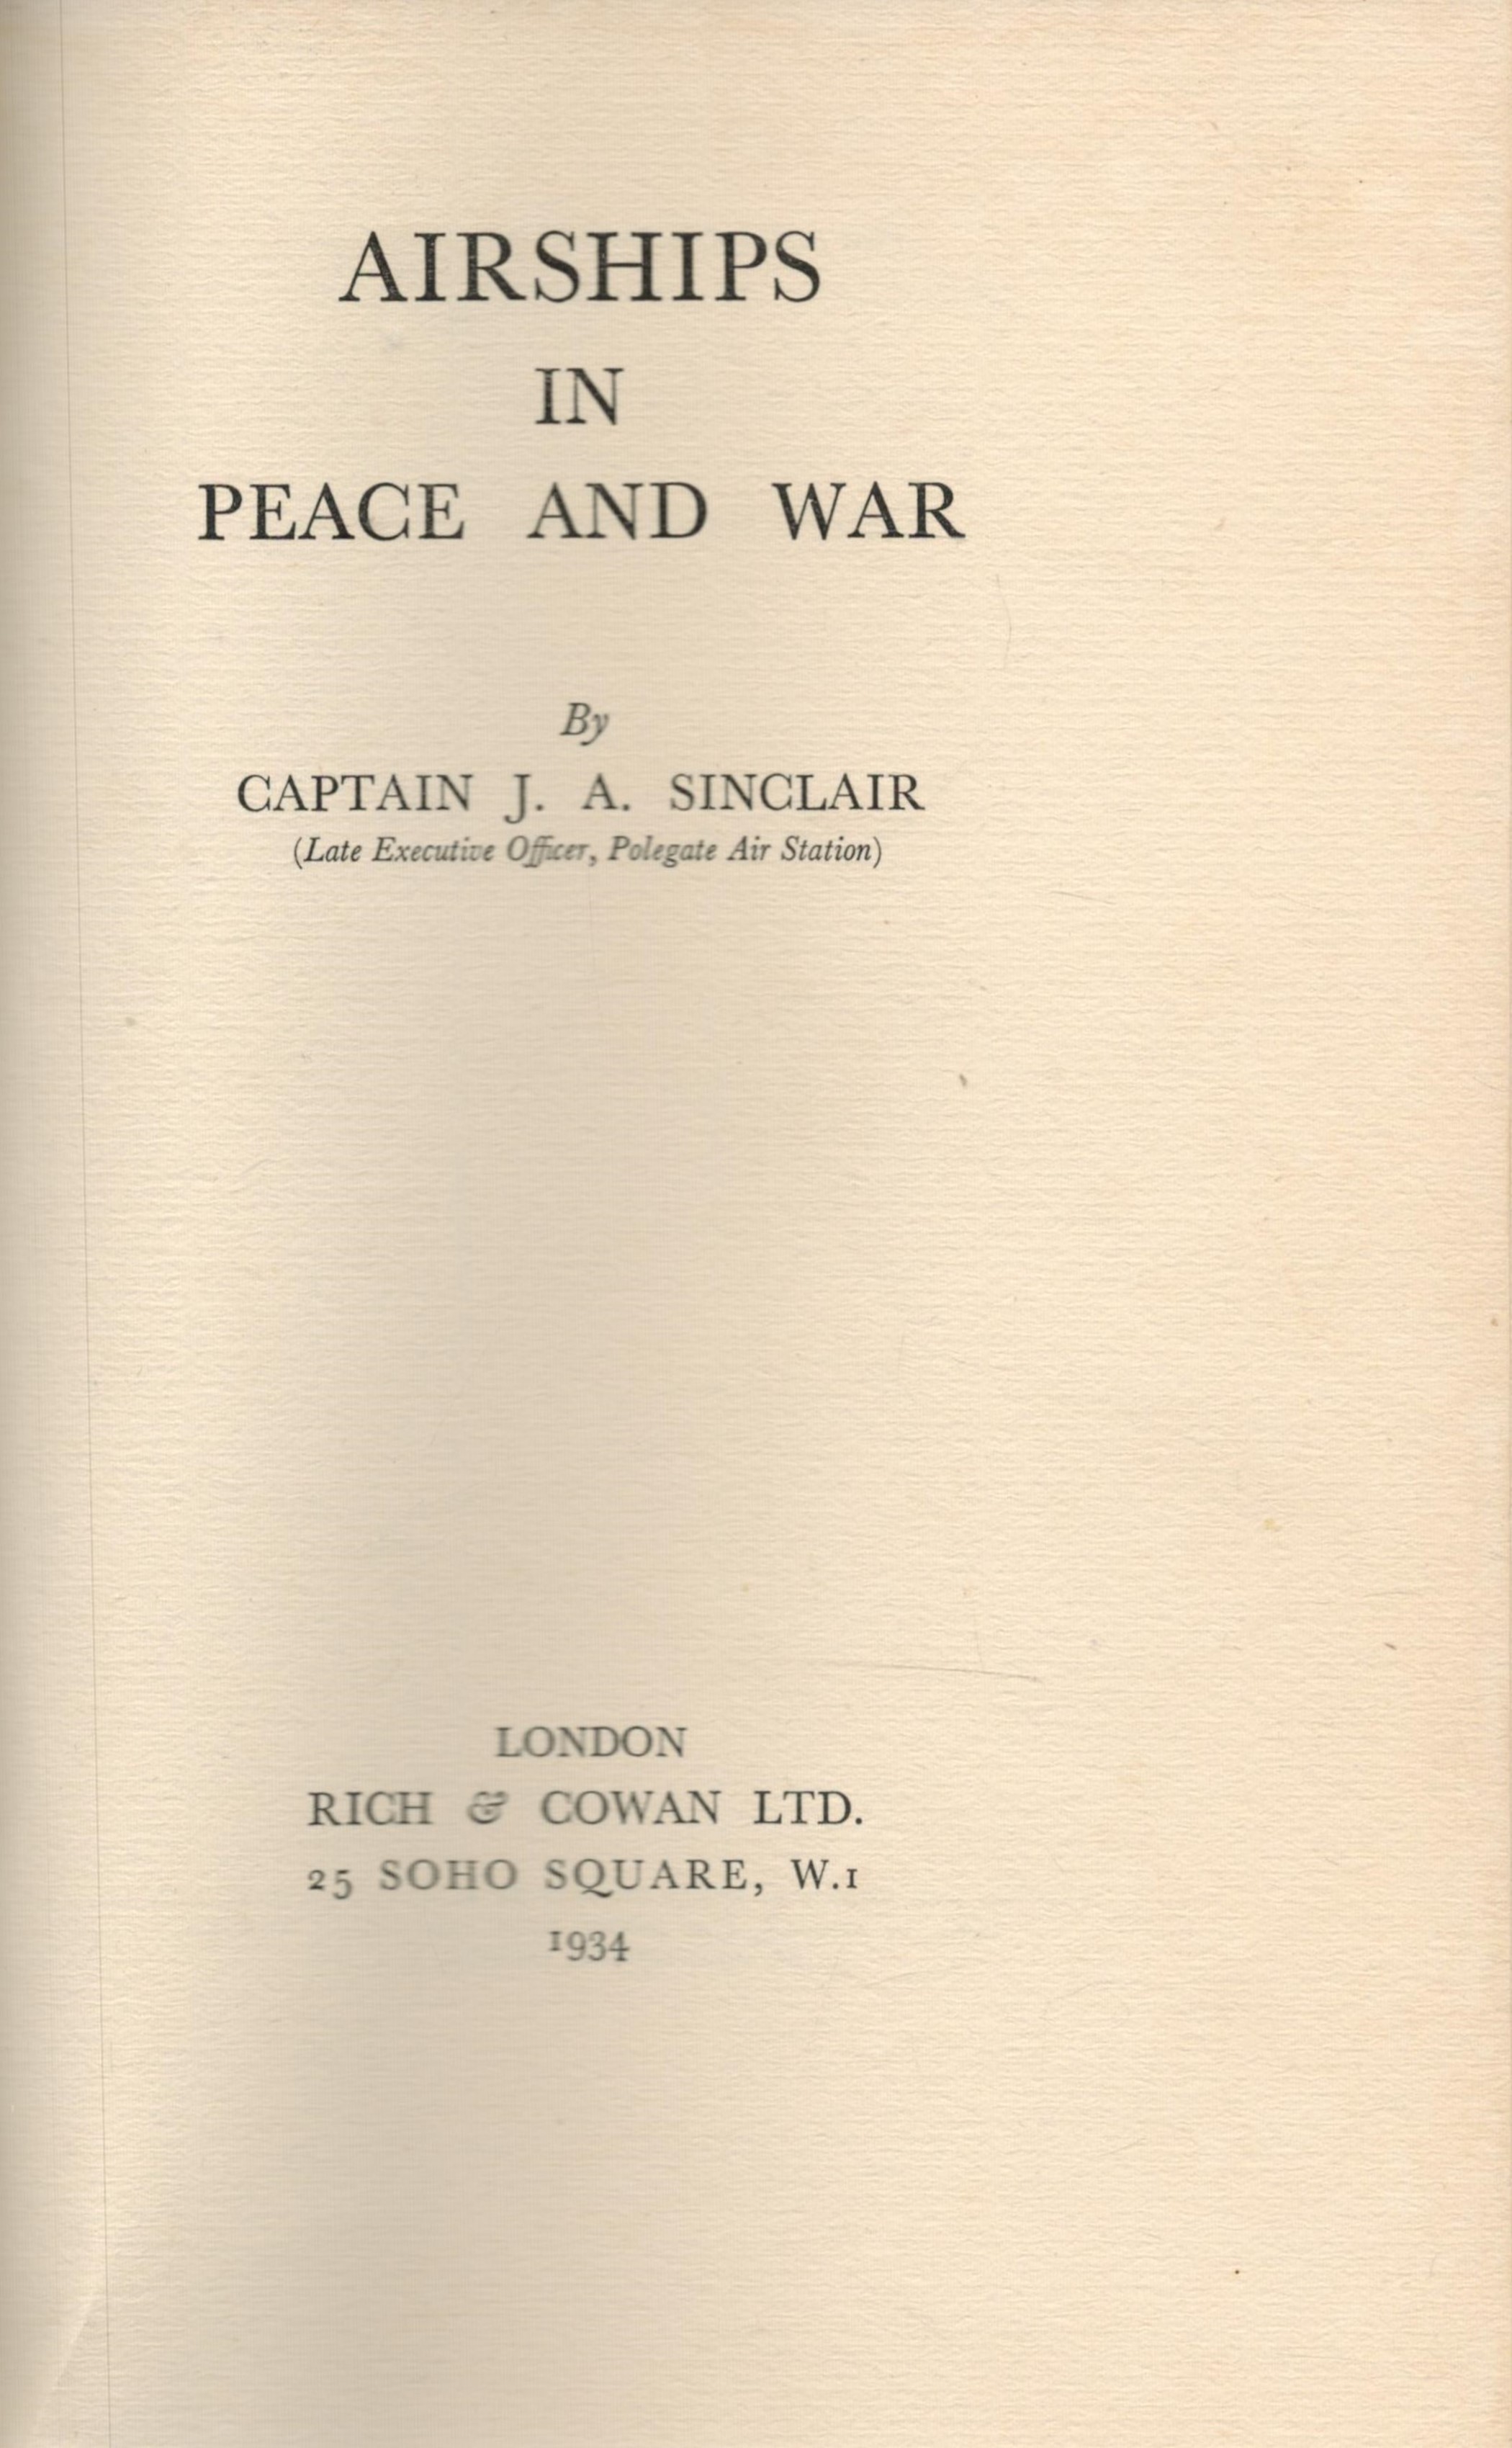 Airships in Peace and War by Captain J A Sinclair 1934 First Edition Hardback Book with 308 pages - Image 2 of 3